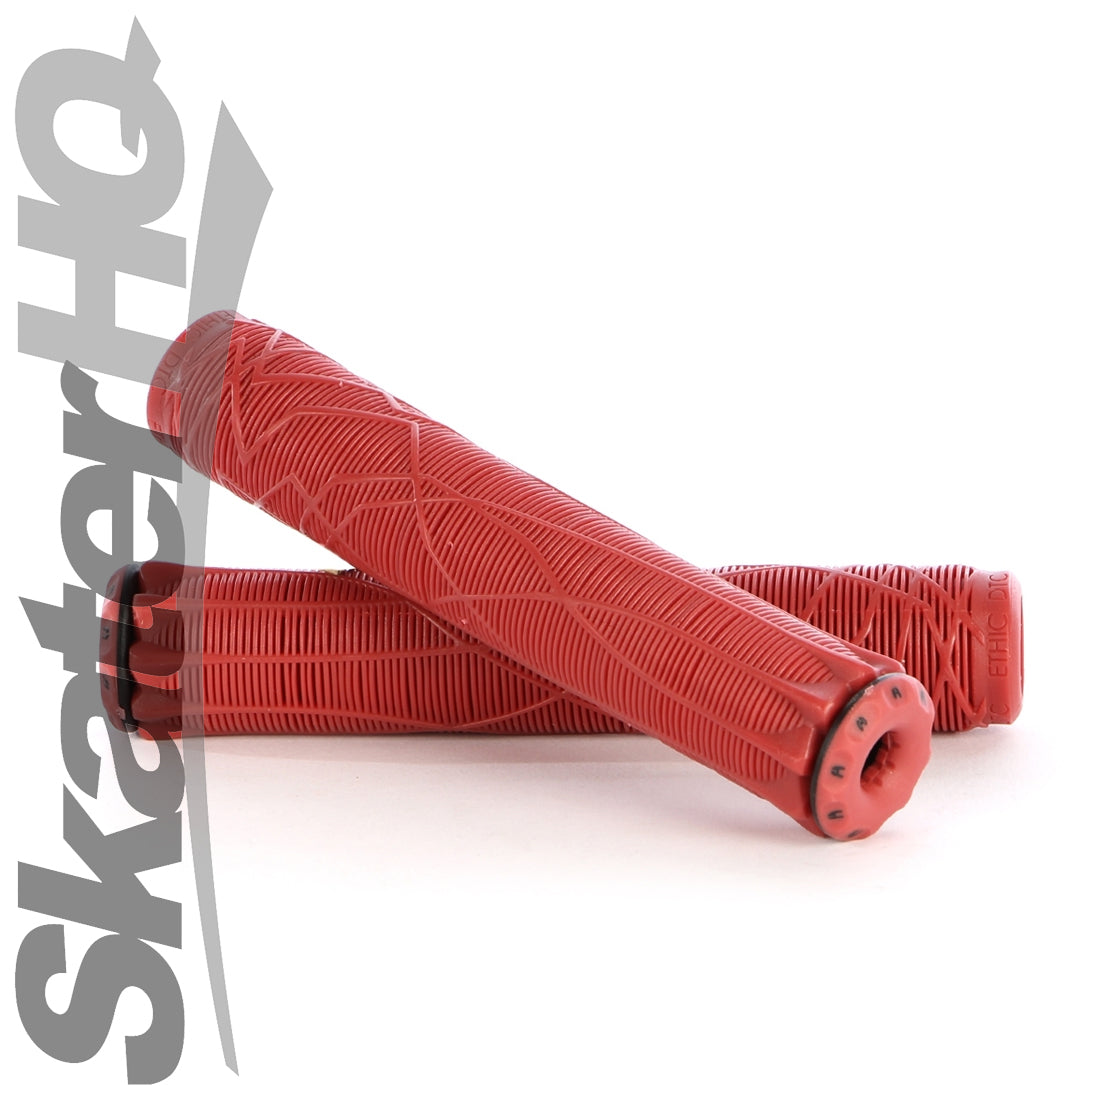 Ethic DTC Handle Grips - Red Scooter Grips